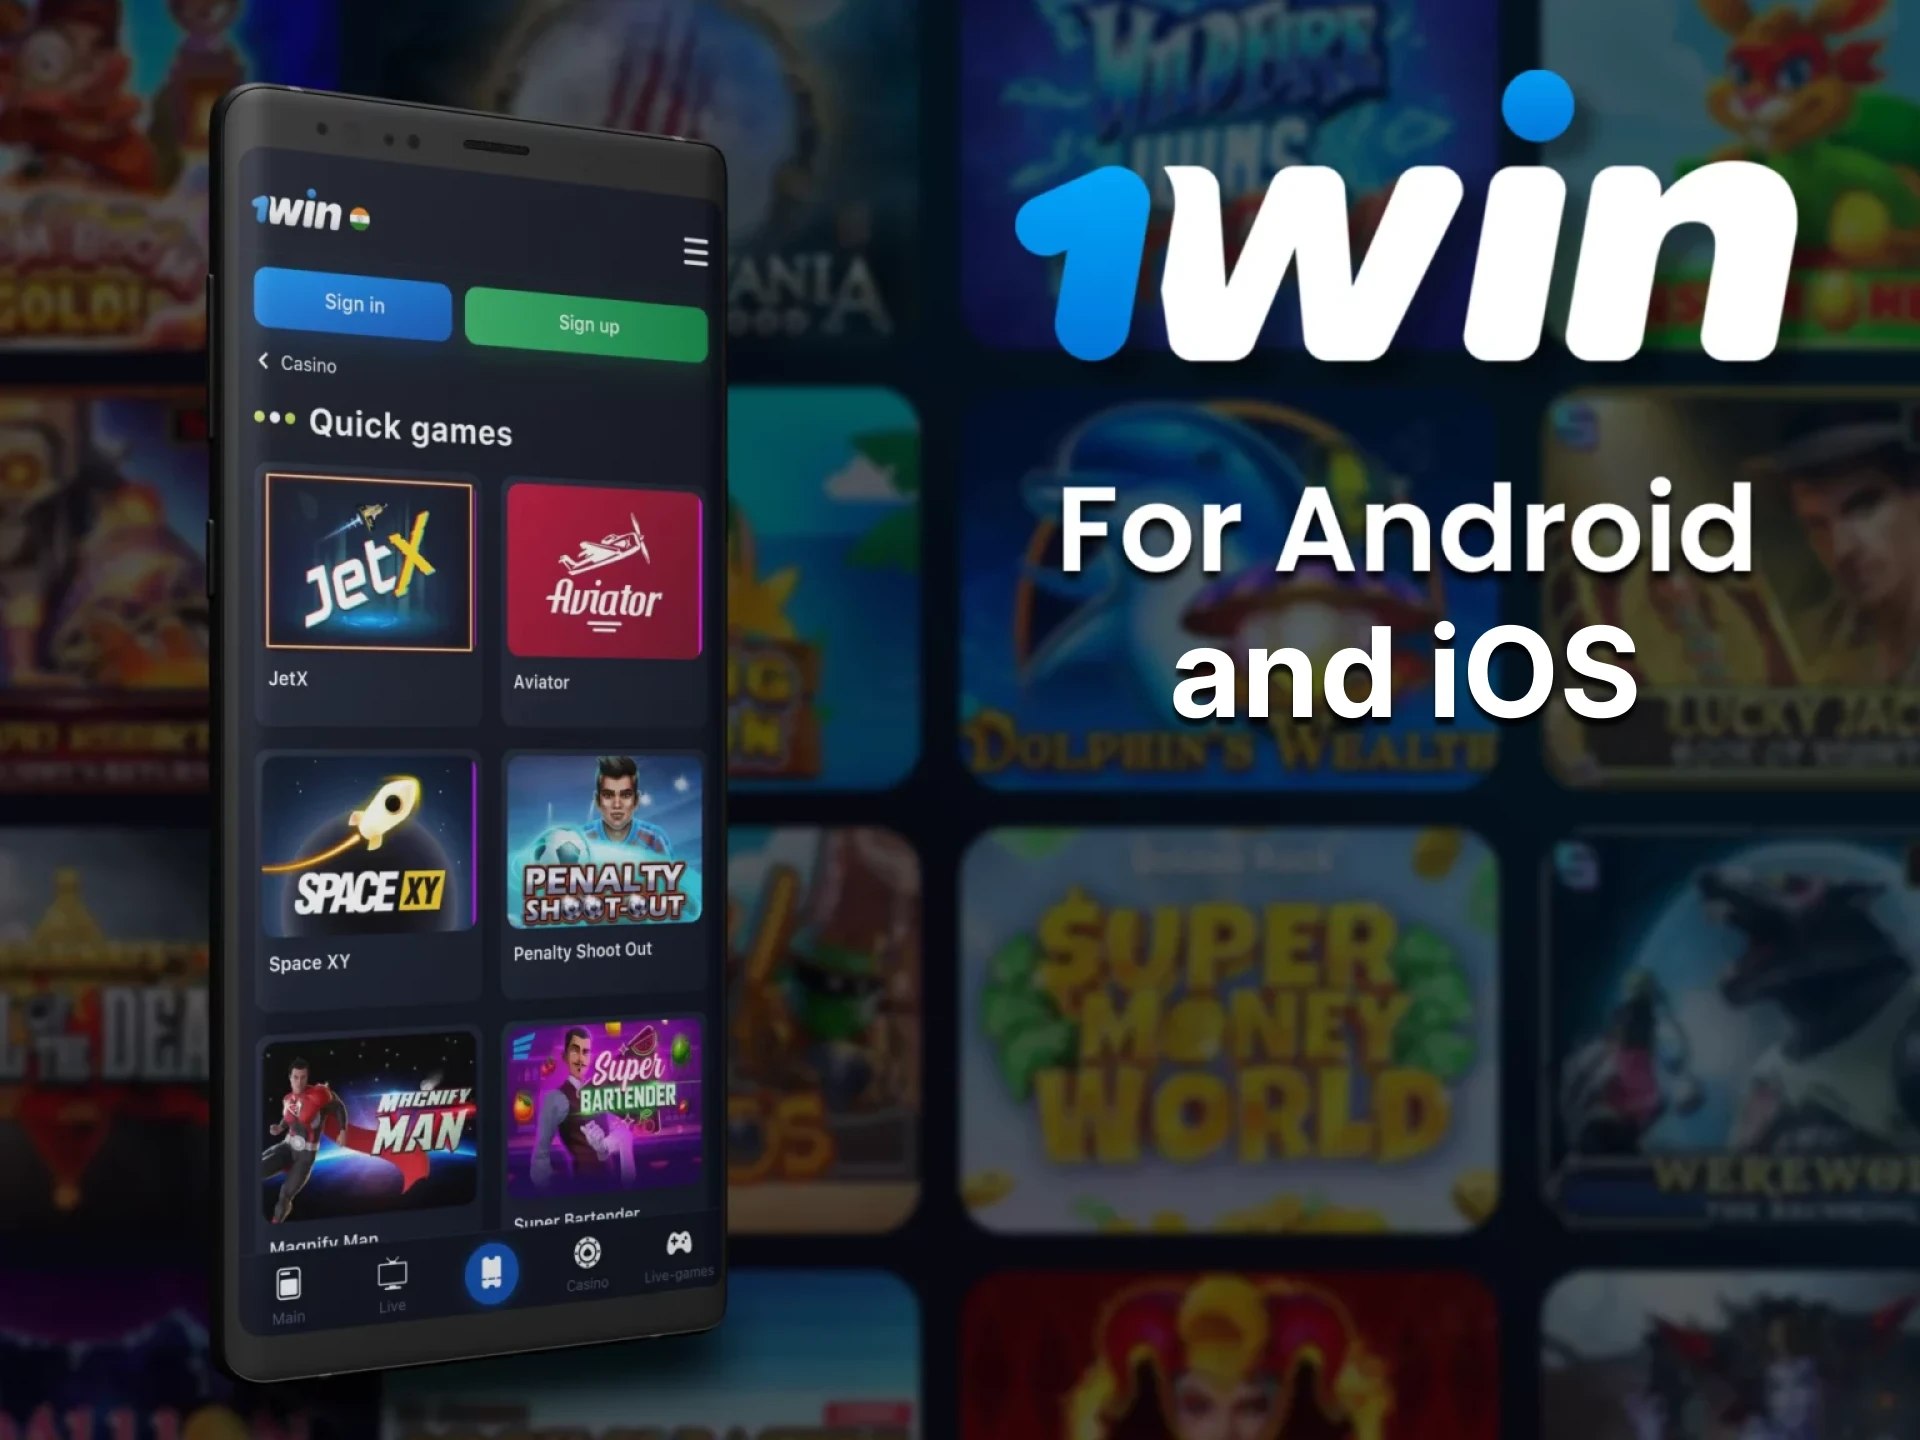 Download the 1win app on Android and iOS for Quick Game.